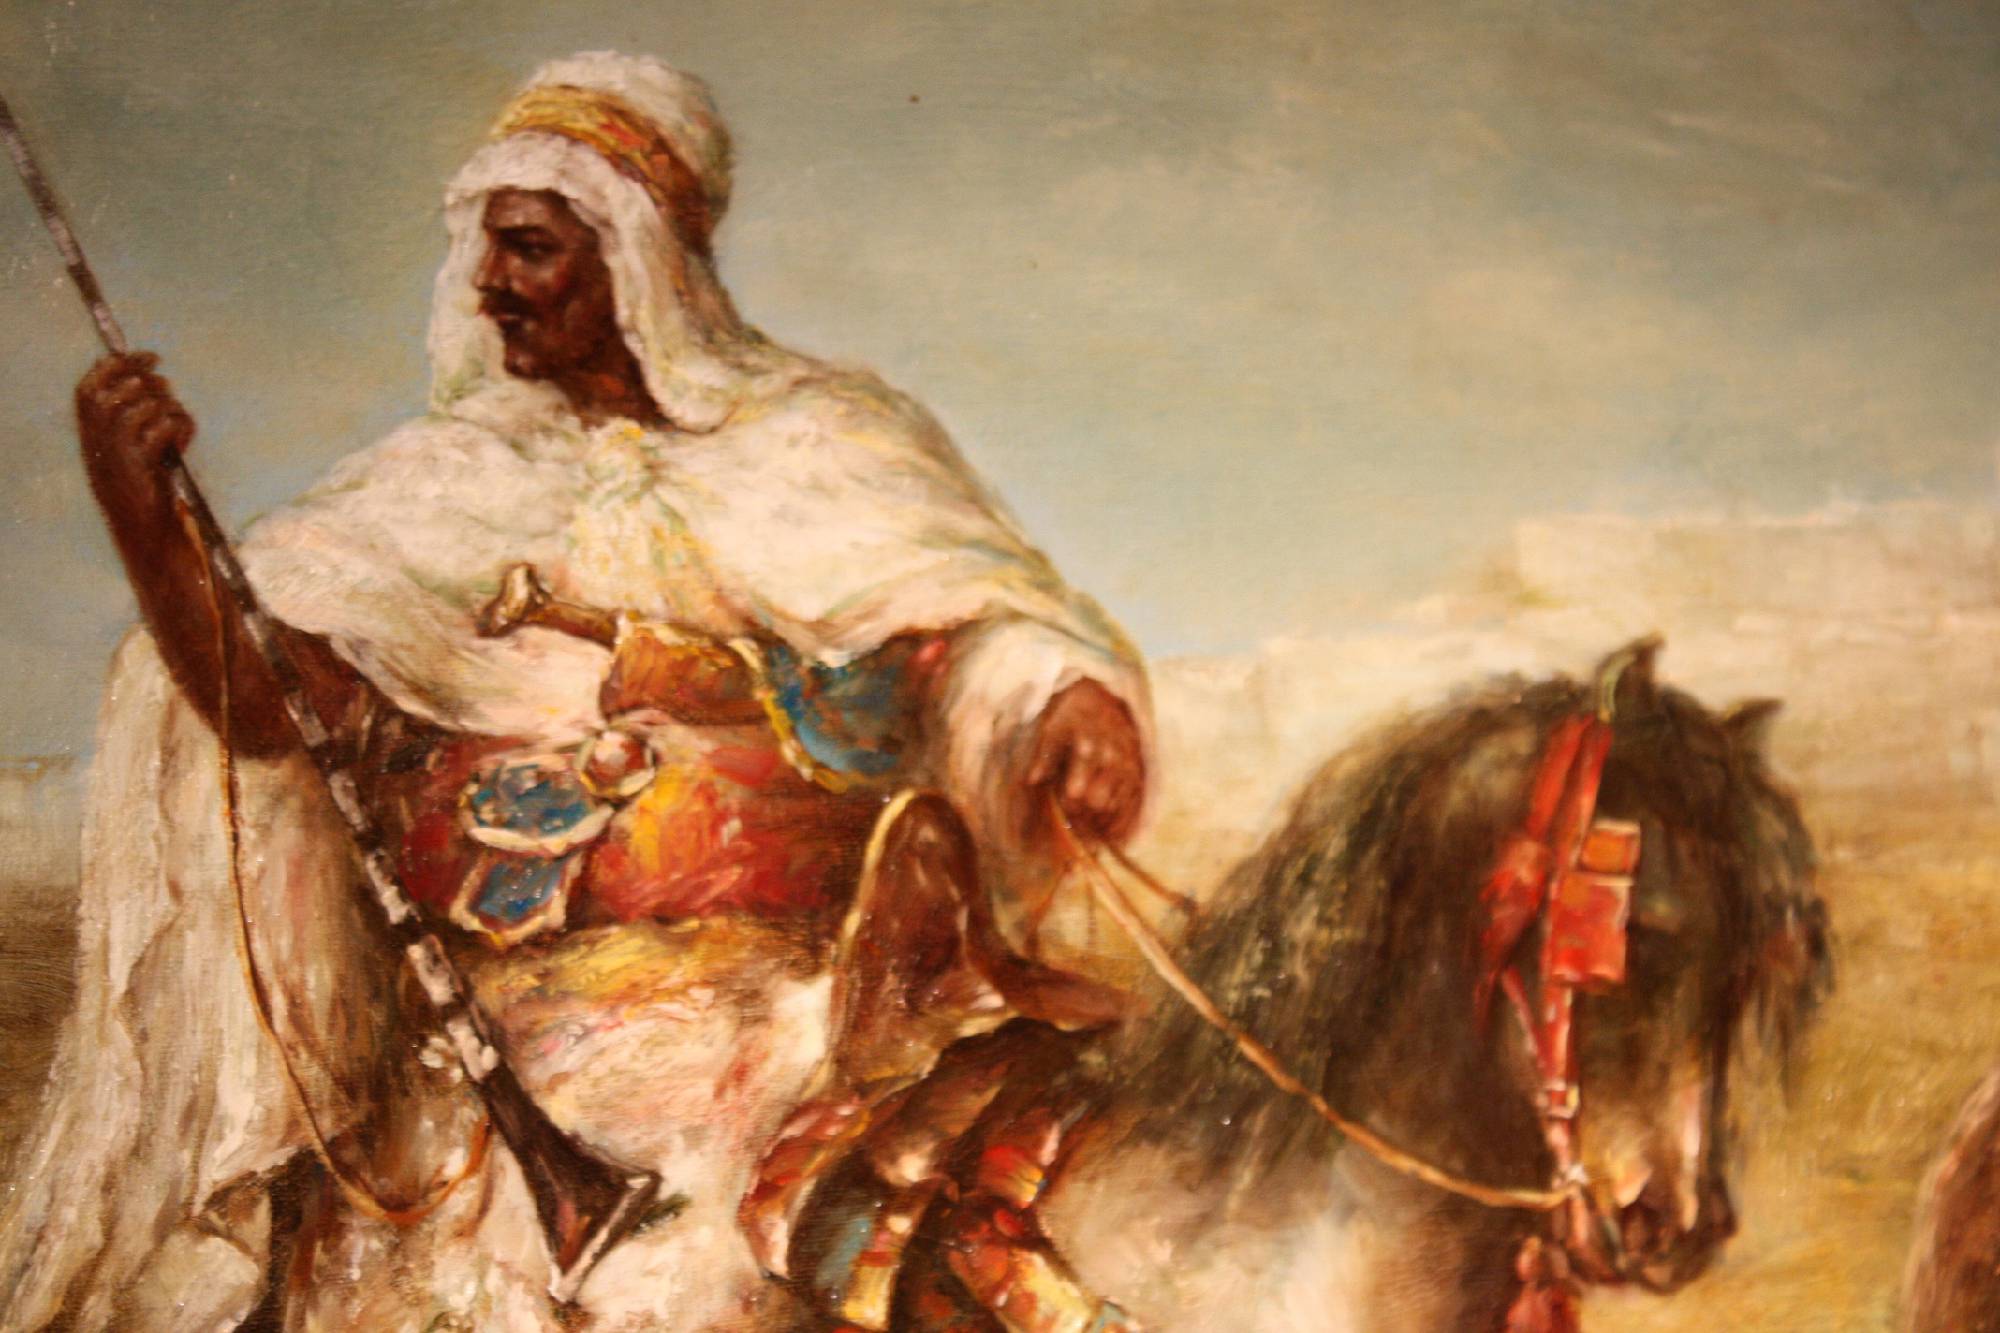 Large 20th century painting oil on canvas scenery of Arabic soldiers on horses, after Adolf Schreyer